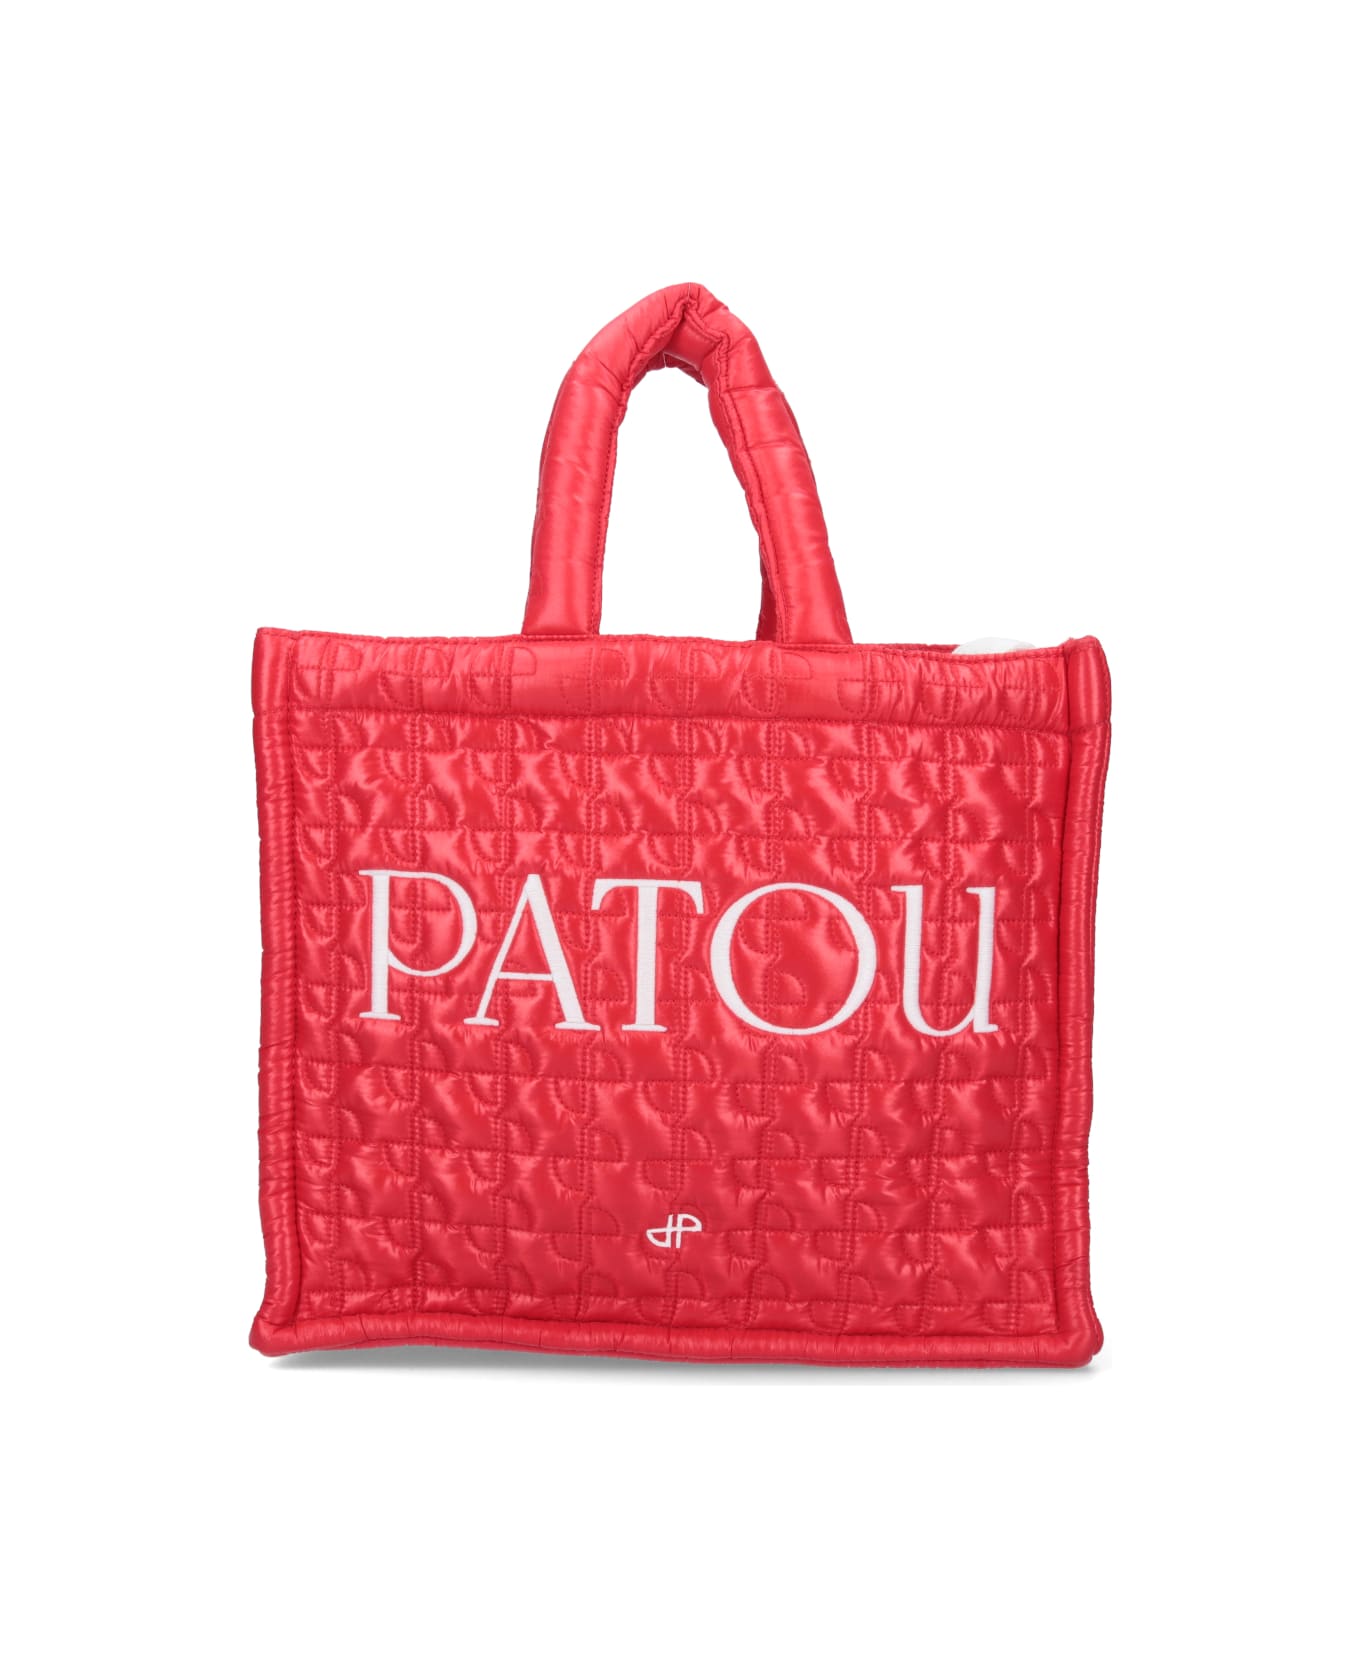 Patou Small Quilted Tote Bag - Rosso トートバッグ